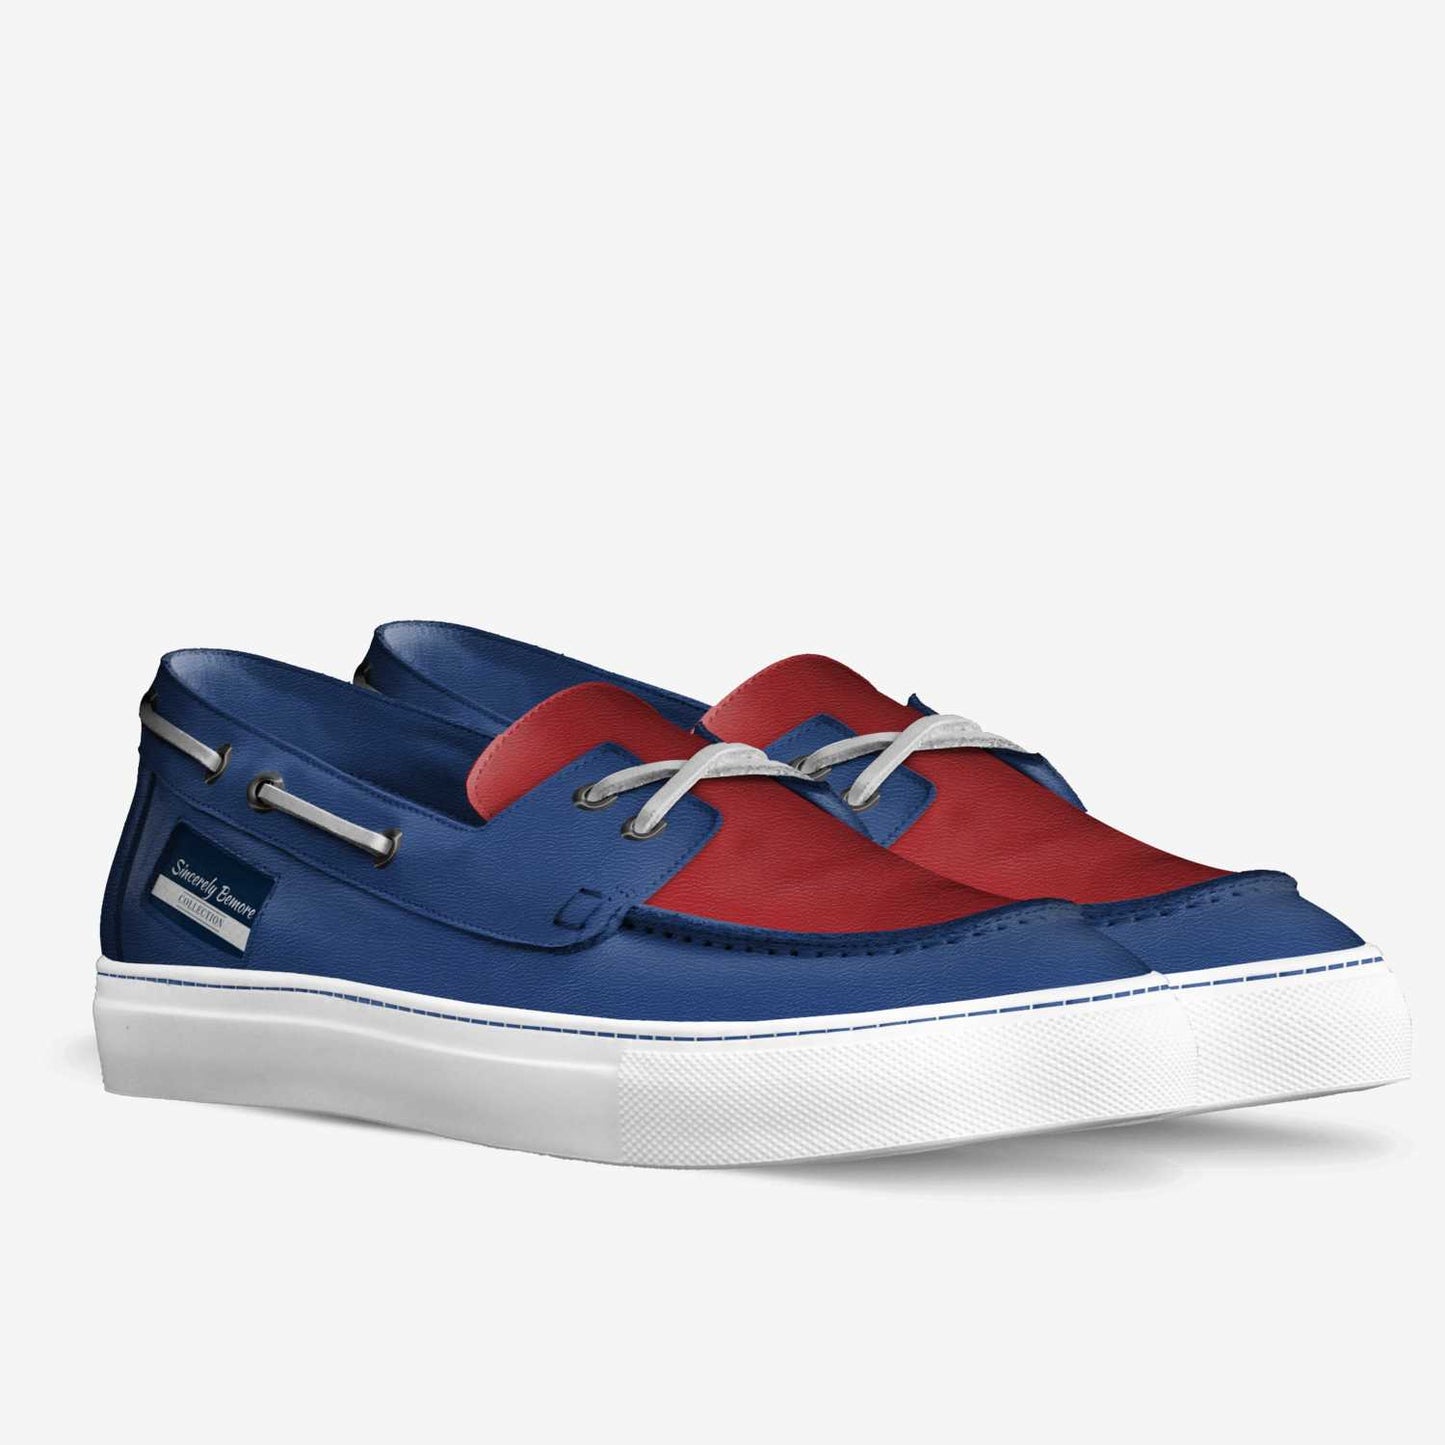 CLASSIC BOAT SNEAKER -  - Sincerely BeMore - Sincerely BeMore